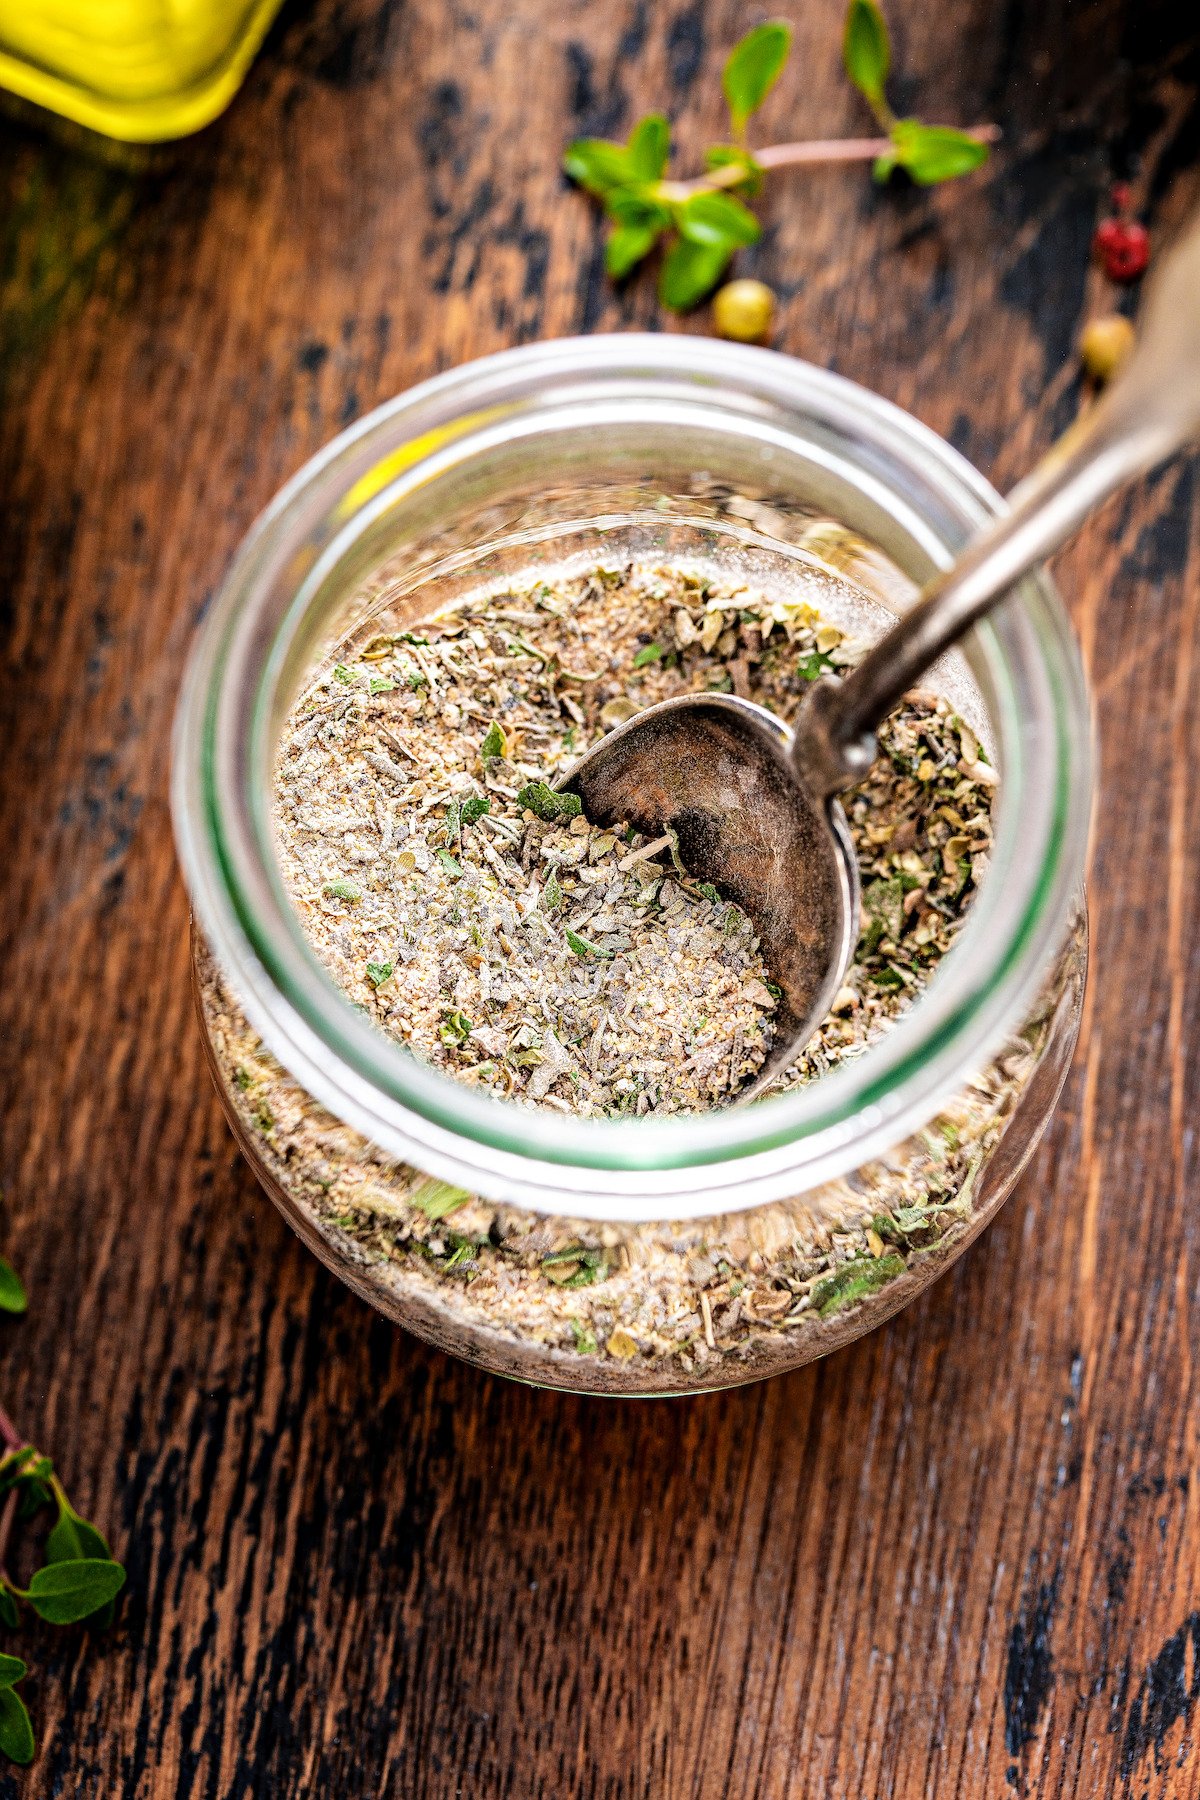 Jar of Greek spices and herbs.